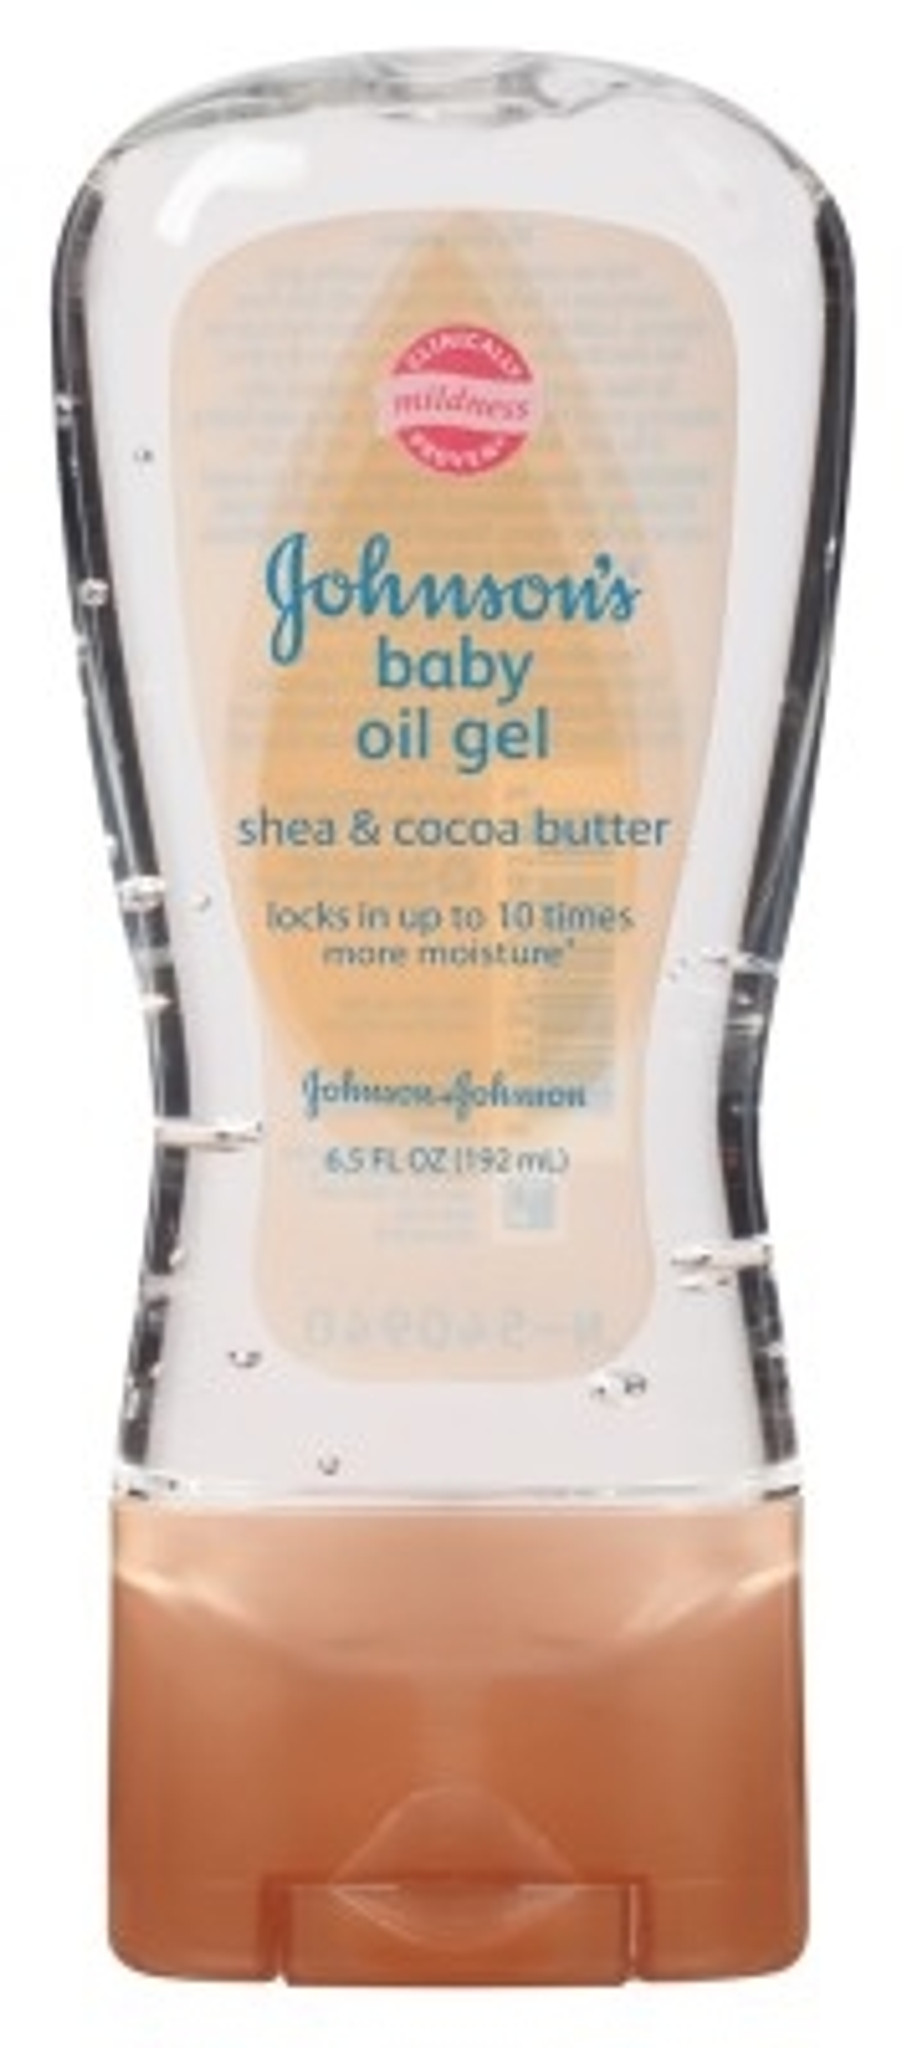 BL Johnsons Baby Oil Gel Shea & Cocoa Butter 6.5oz - Pack of 3 